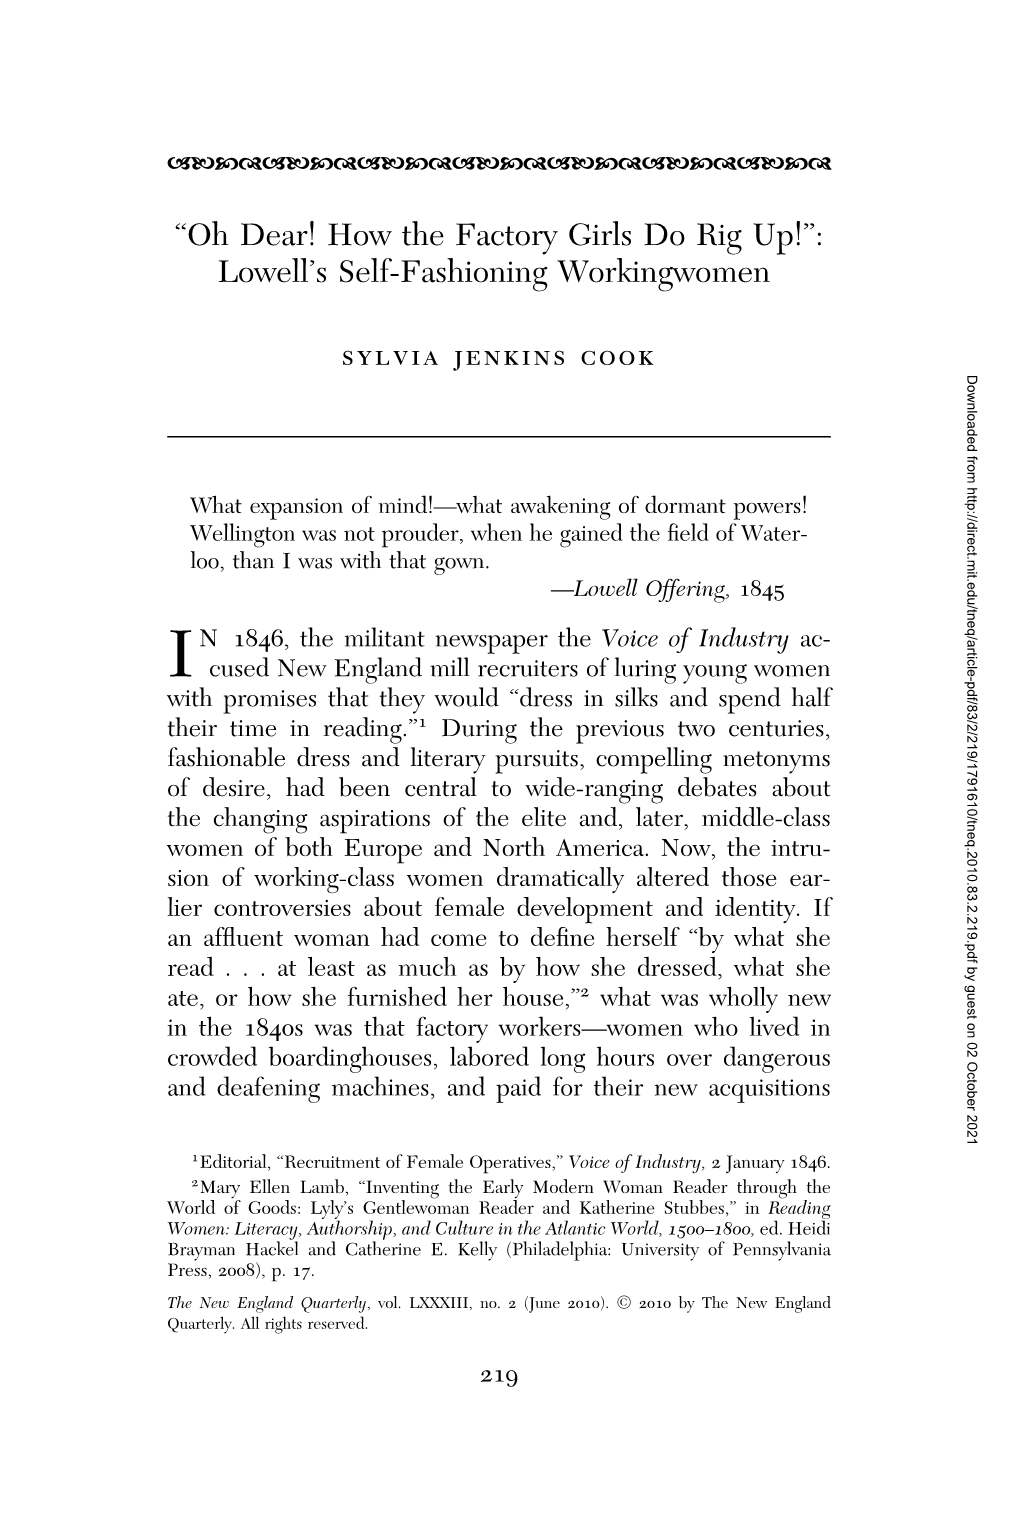 “Oh Dear! How the Factory Girls Do Rig Up!”: Lowell's Self-Fashioning